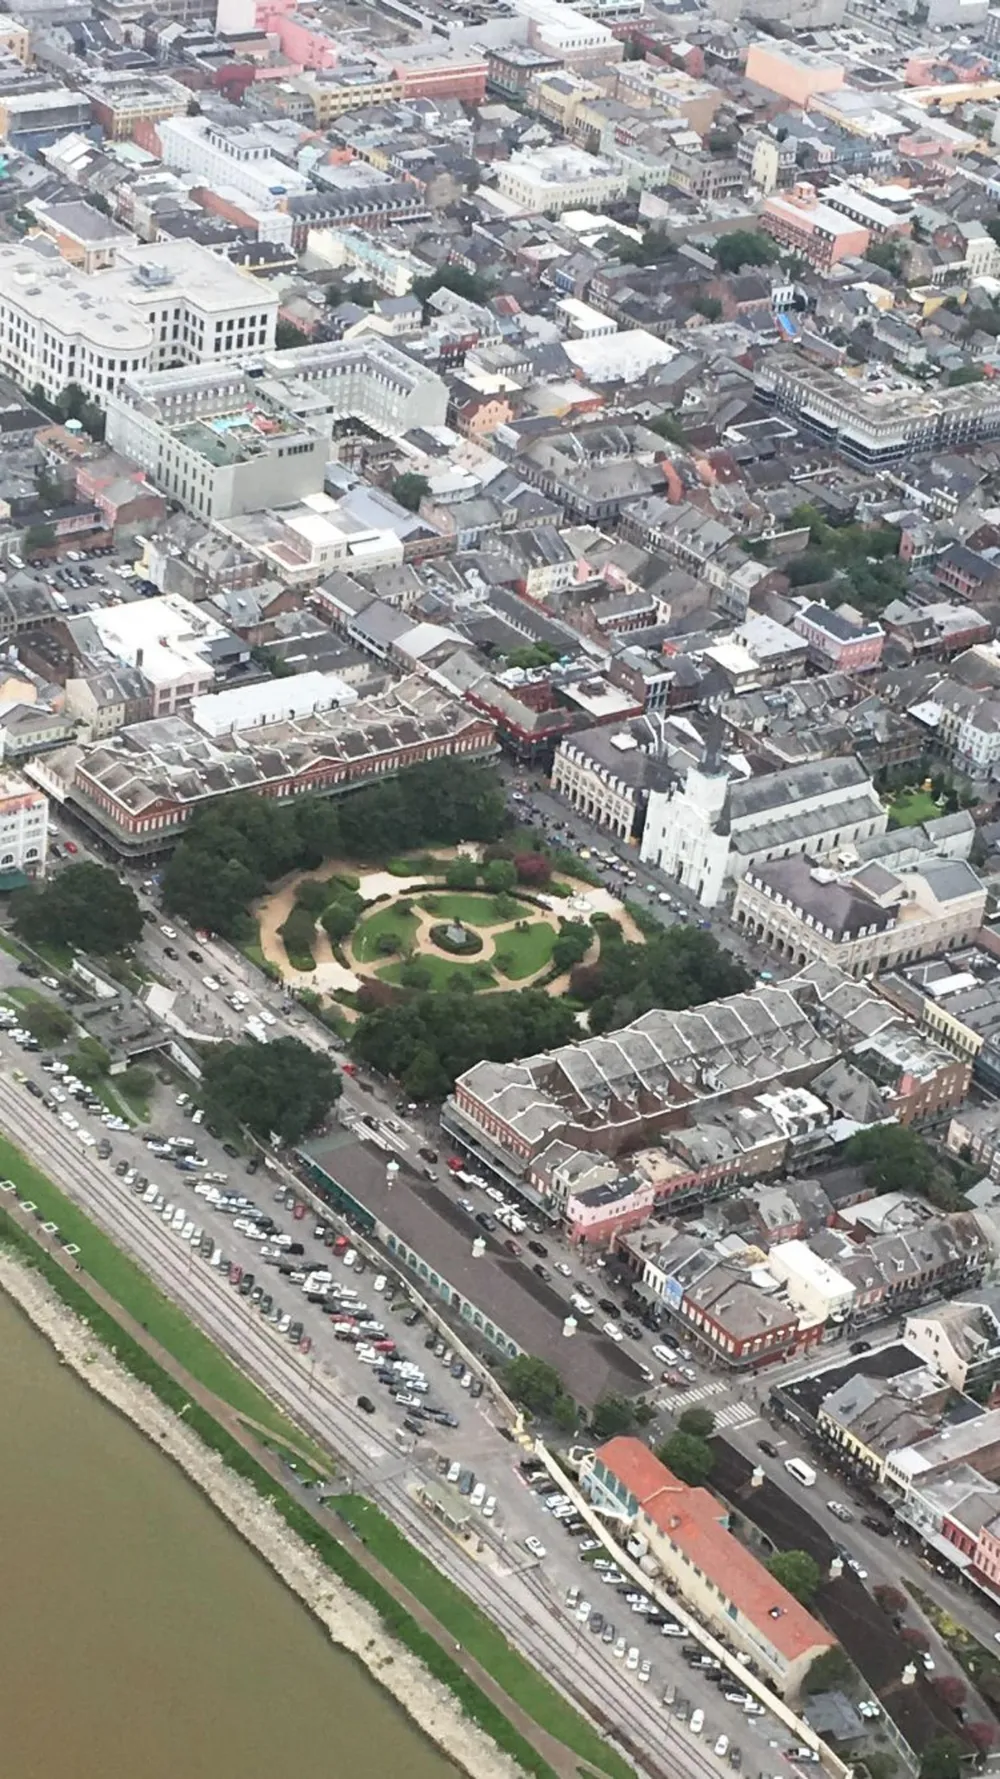 The image is an aerial view of a densely built urban area with distinctive architecture featuring a large symmetrical green space surrounded by historic buildings adjacent to a highway and a body of water